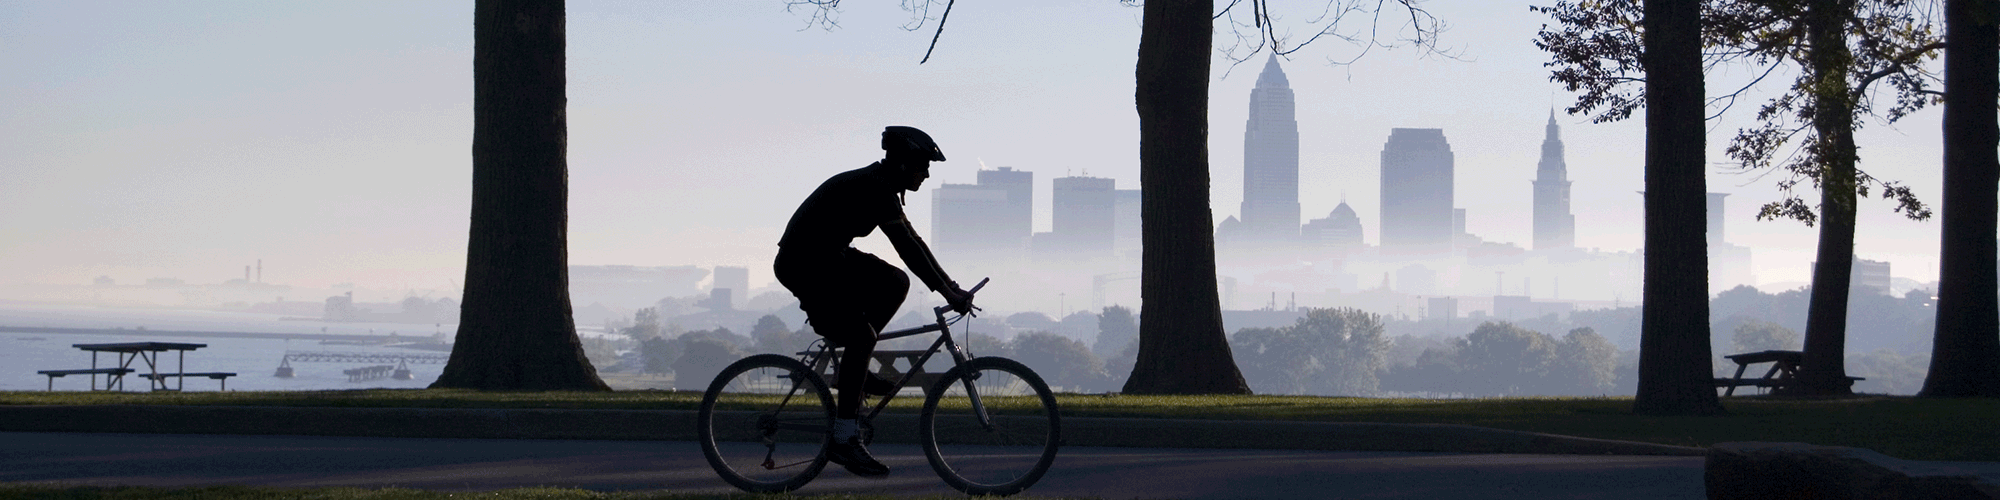 A cyclist silhouetted by a foggy background